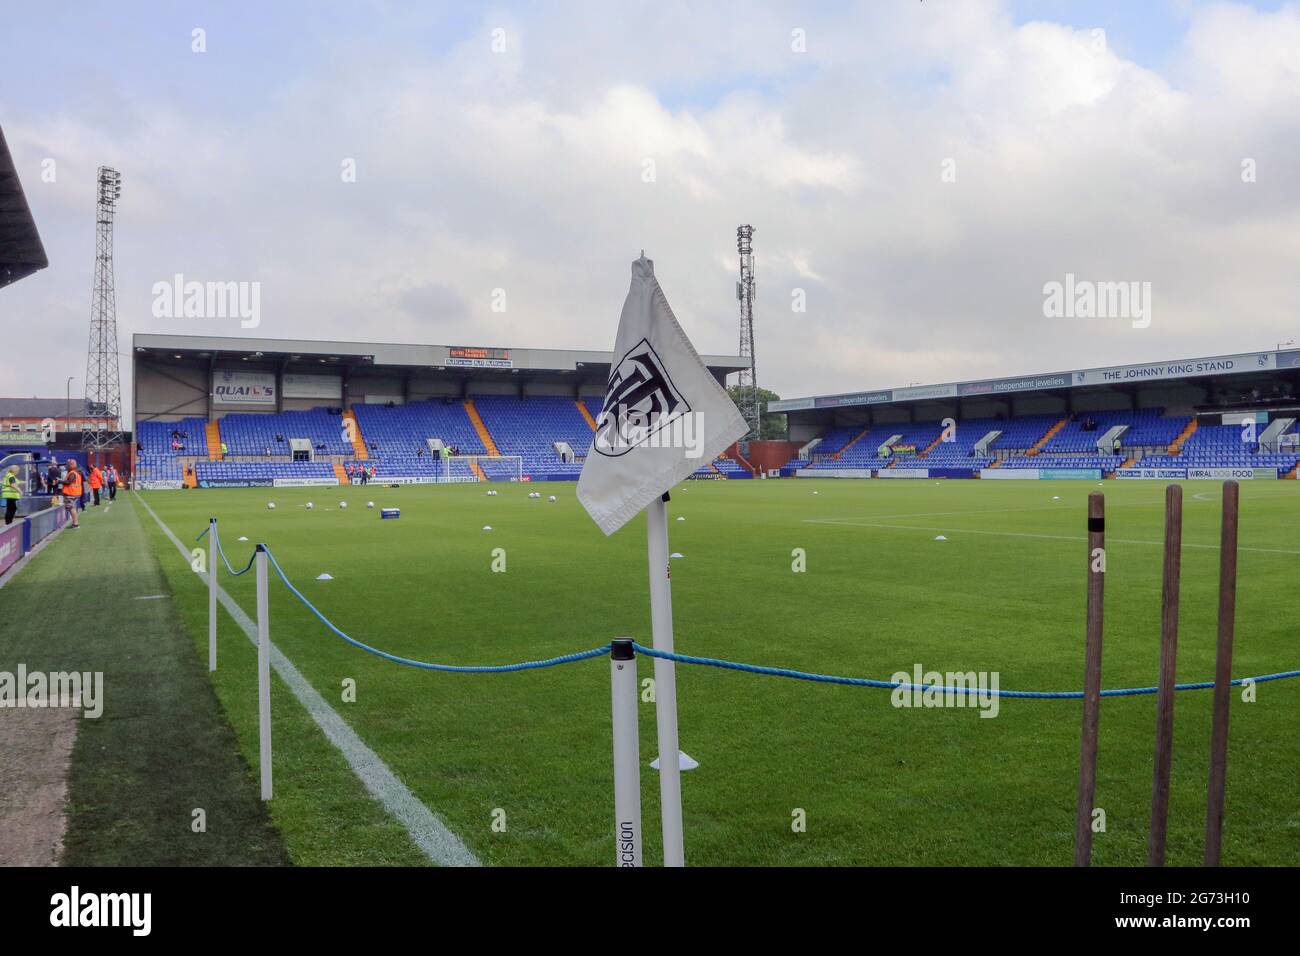 Birkenhead, UK. 10th July, 2021. A general view of Prenton Park before the Pre-Season Friendly match between Tranmere Rovers and Rangers at Prenton Park on July 10th 2021 in Birkenhead, England. (Photo by Richard Ault/phcimages.com) Credit: PHC Images/Alamy Live News Stock Photo